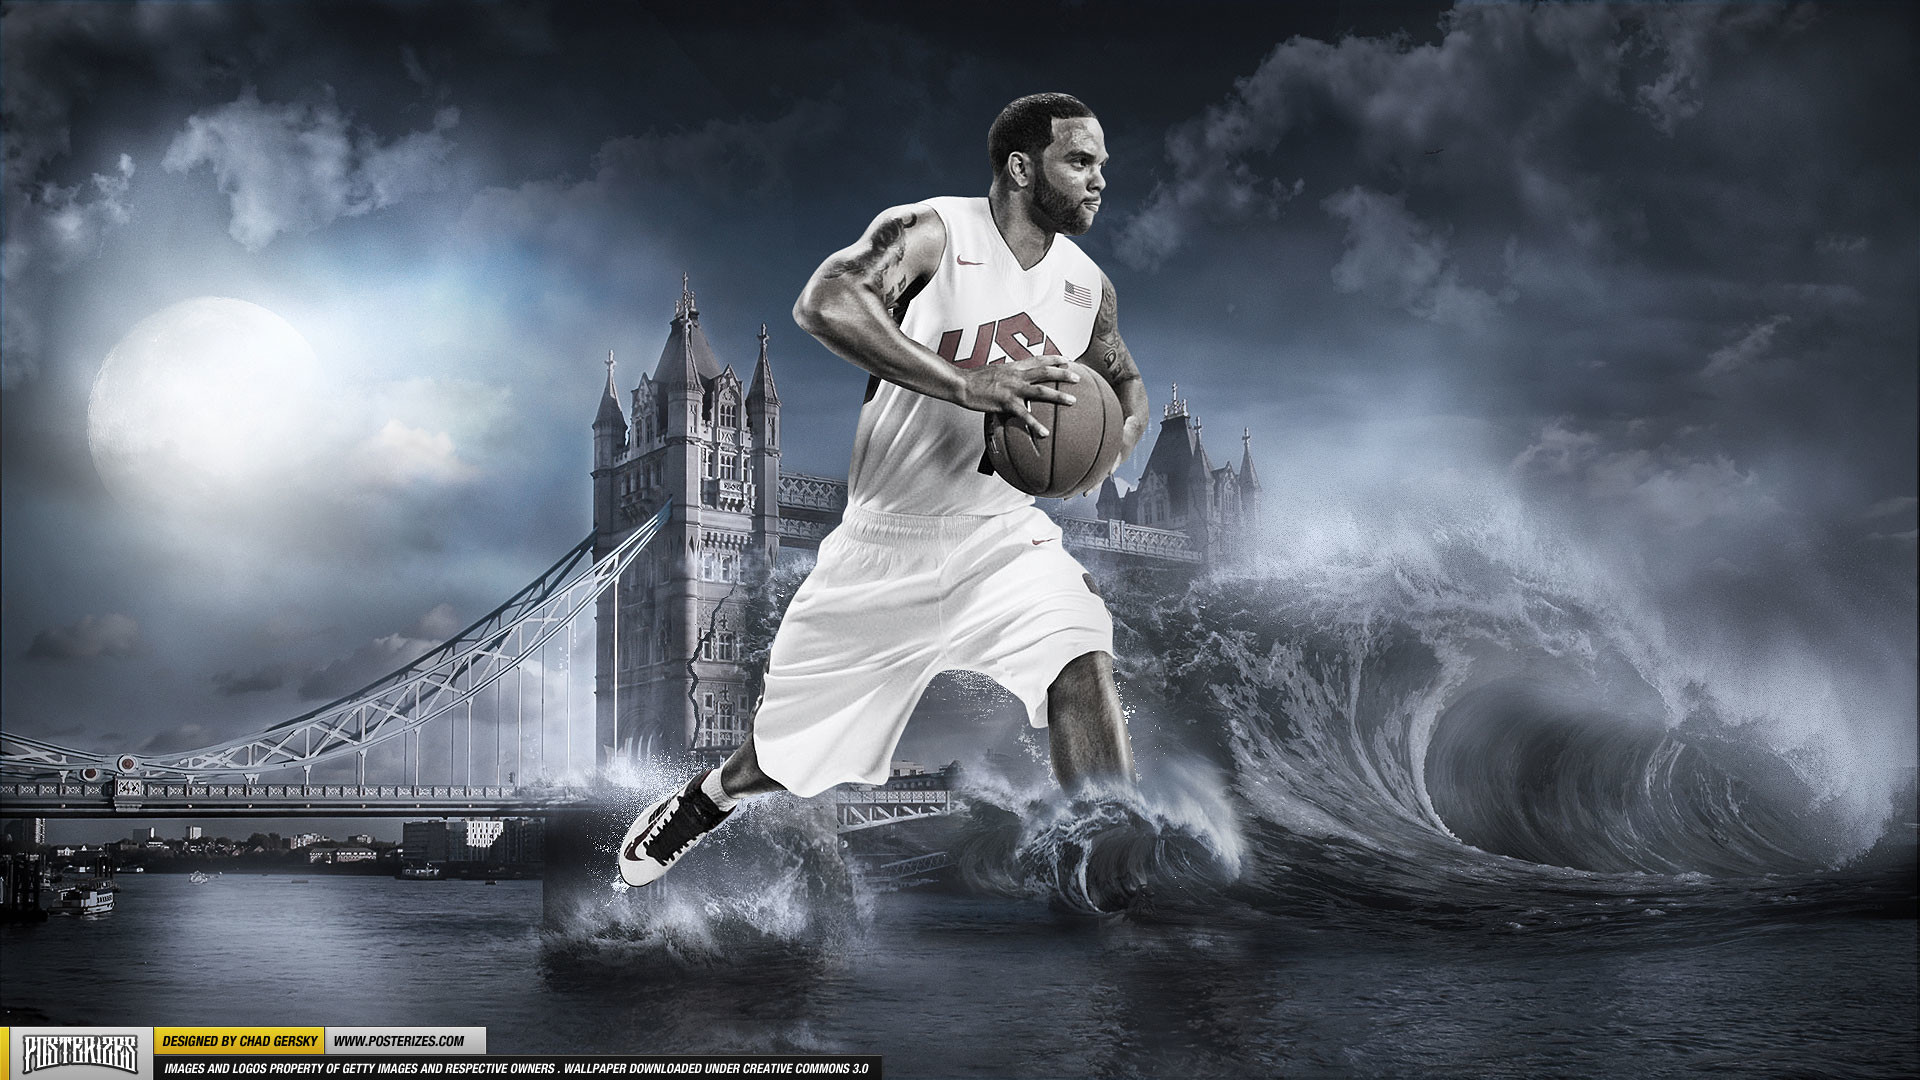 1920x1080 Basketball Wallpaper and Get Going And Learn About Basketball Here -  http://www